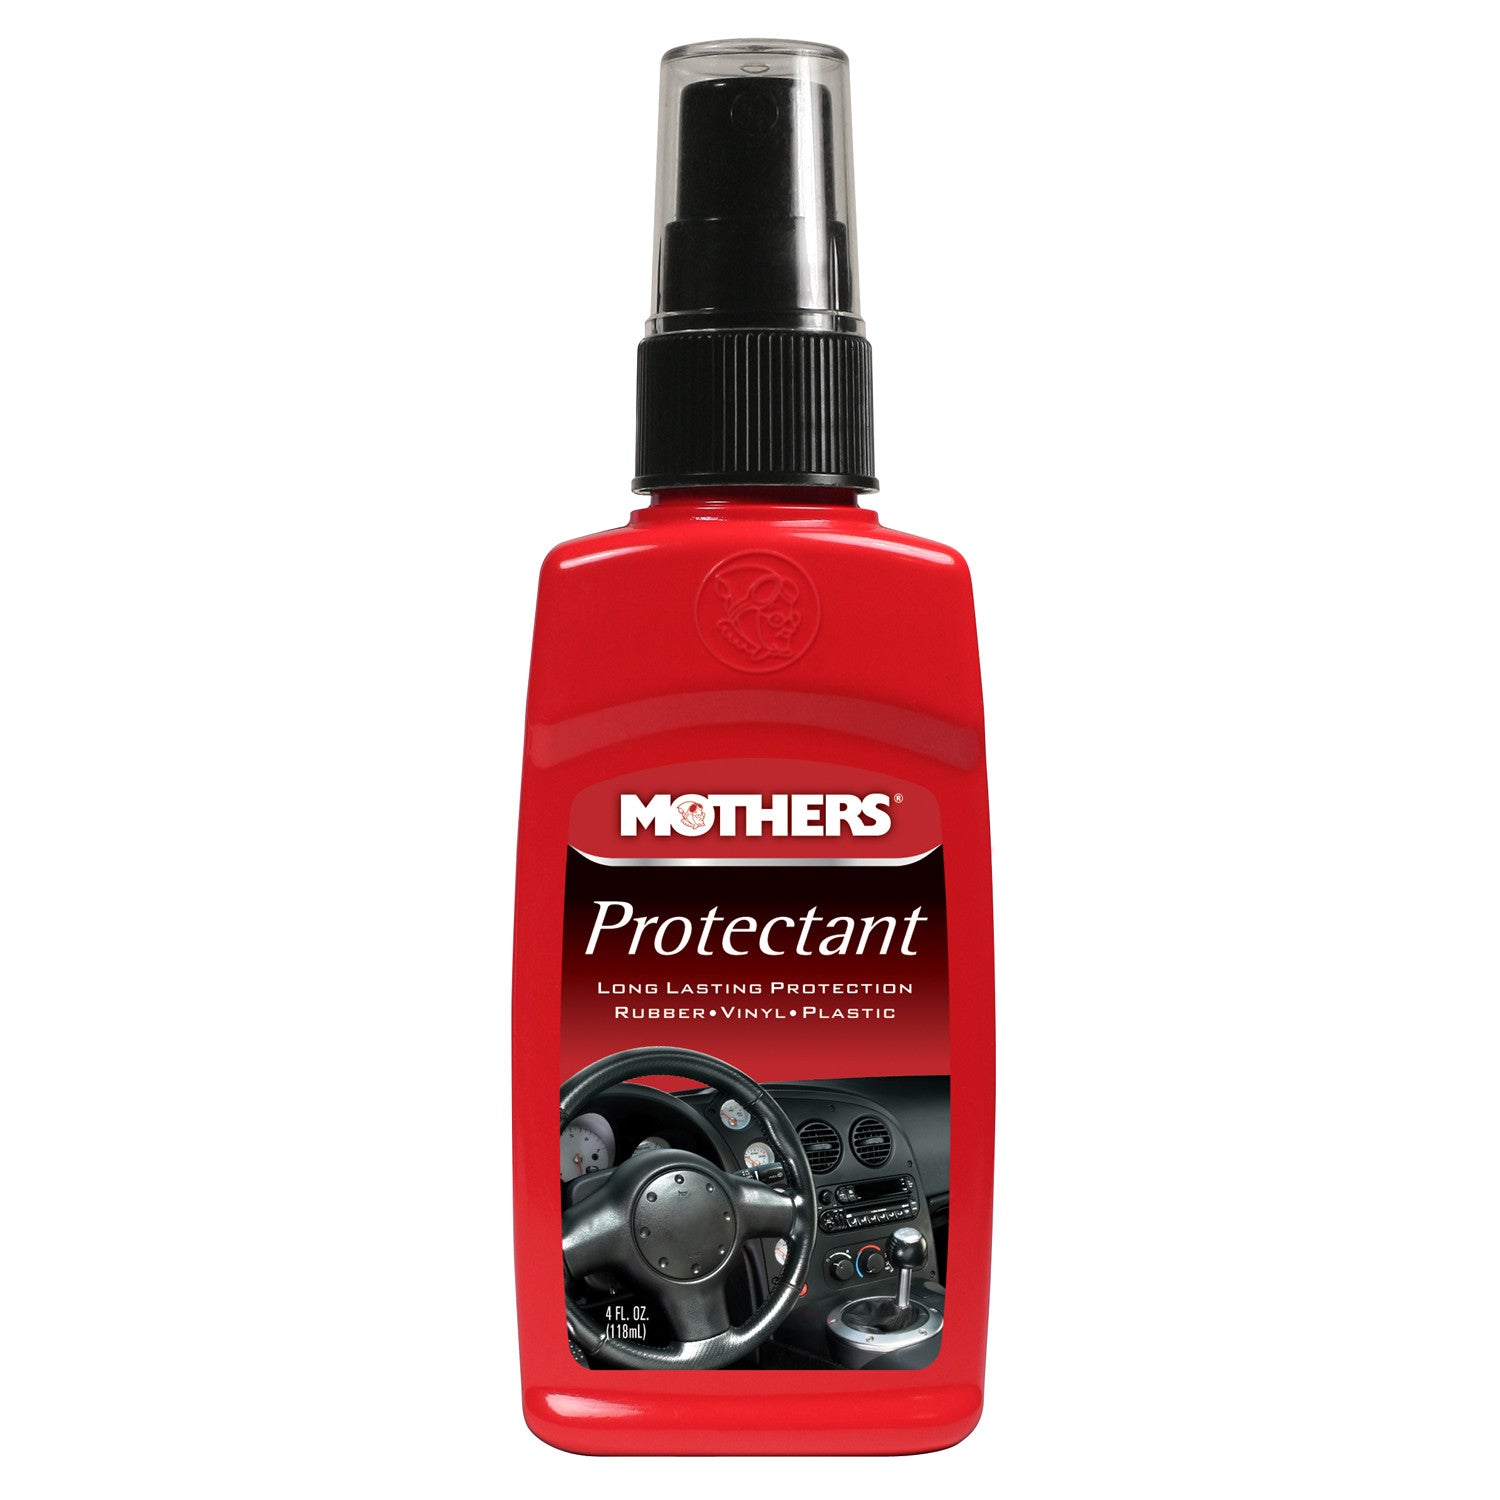 Mothers Protectant 4 oz.